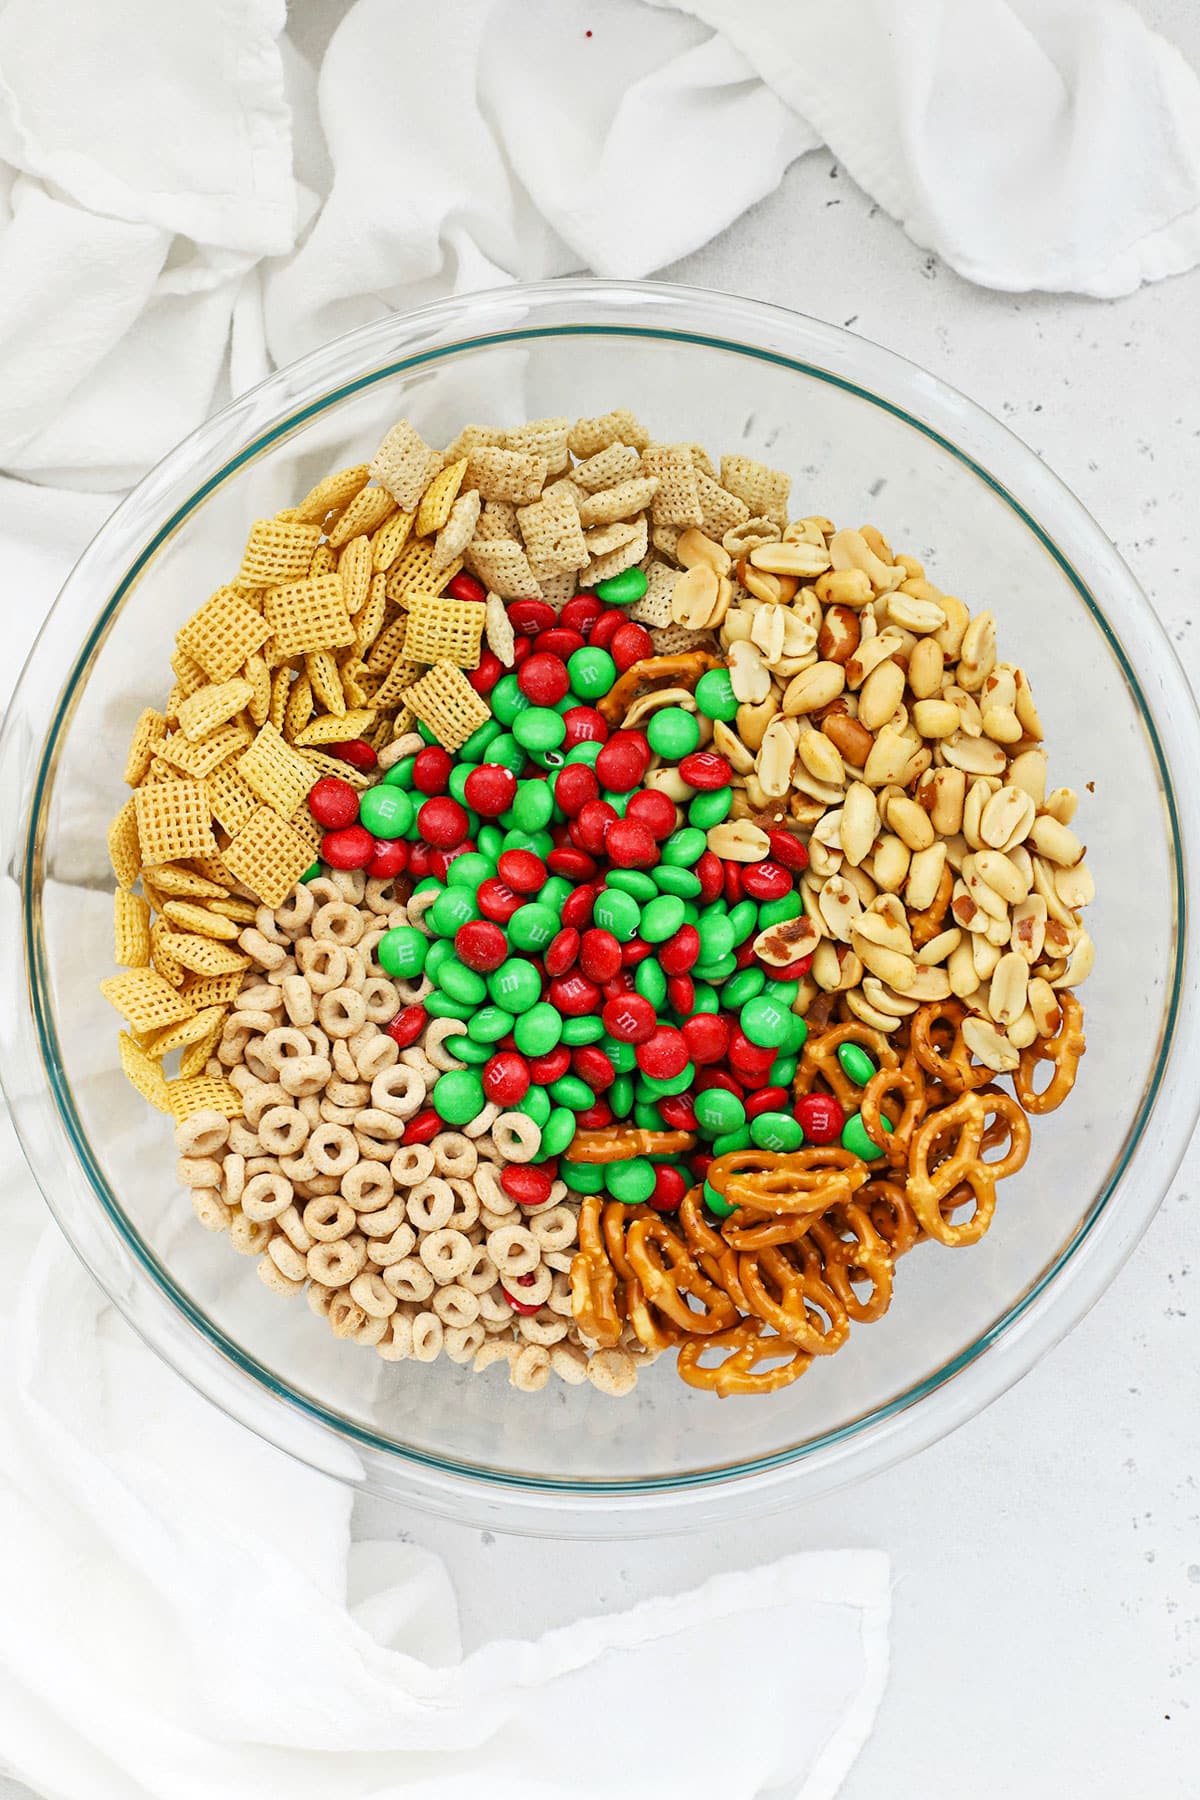 Ingredients for gluten-free Christmas chex mix in a large glass bowl